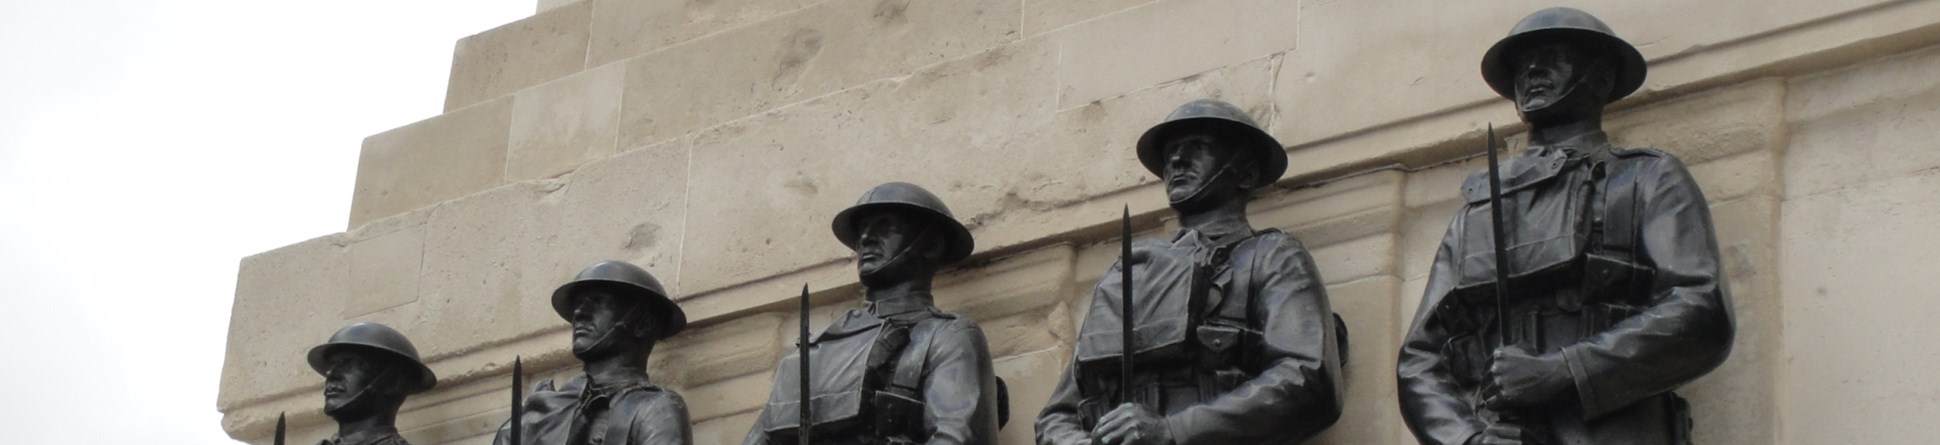 Statues of five guardsmen on the Guards Memorial by Horse Guards Parade, Westminster. It was unveiled in 1926 and commemorates the 14,000 Guardsmen who died in the First World War.